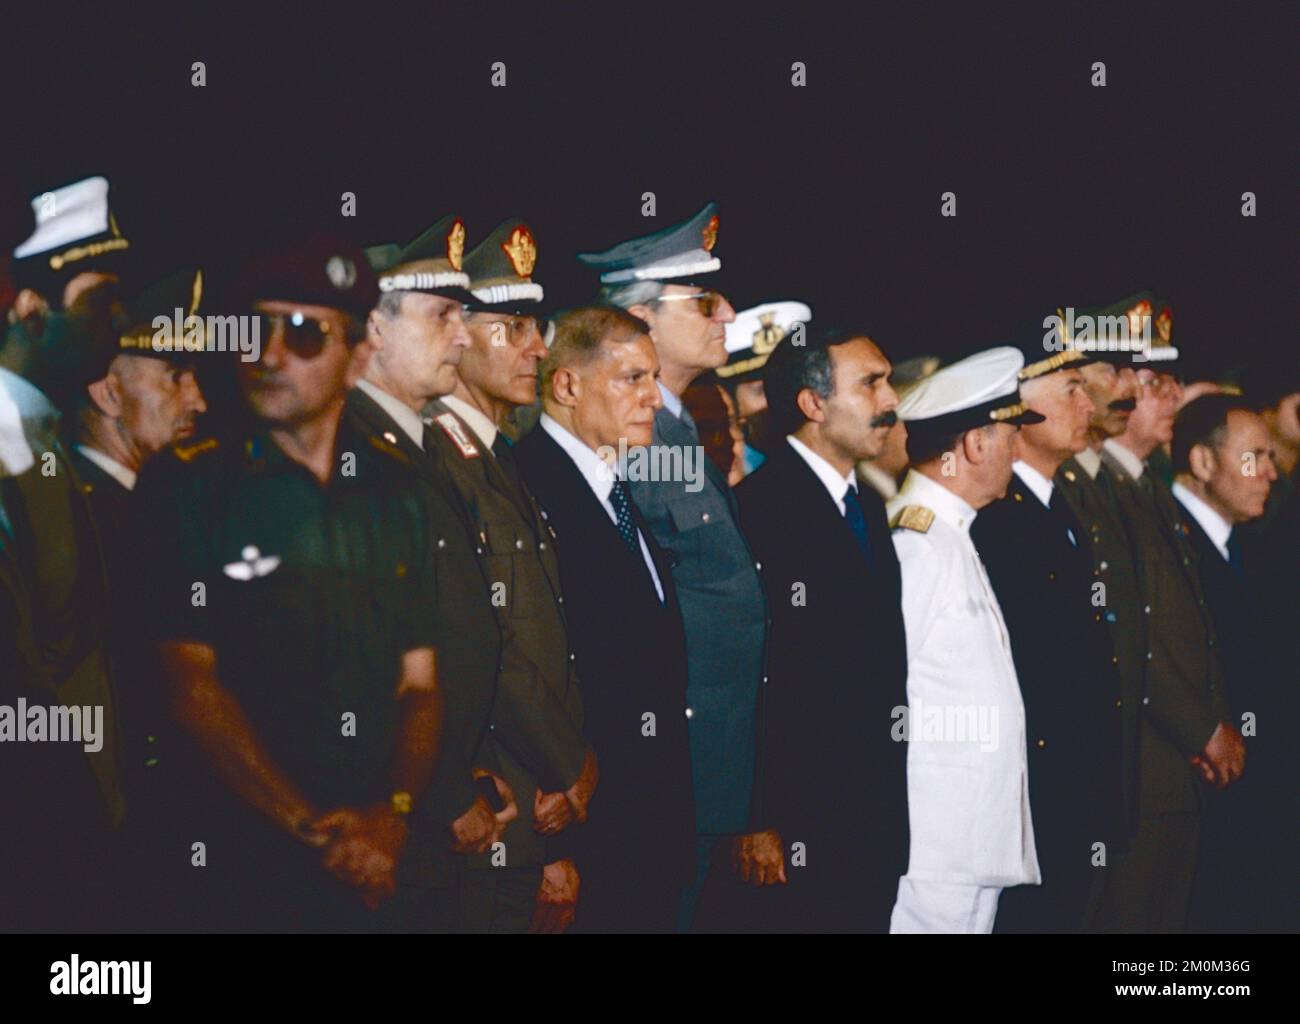 Chief Police Vincenzo Parisi and Carabinieri General Luigi Federici waiting for the corpses of the Italian military paratroopers killed in Somalia, Roma, Italy 1993 Stock Photo